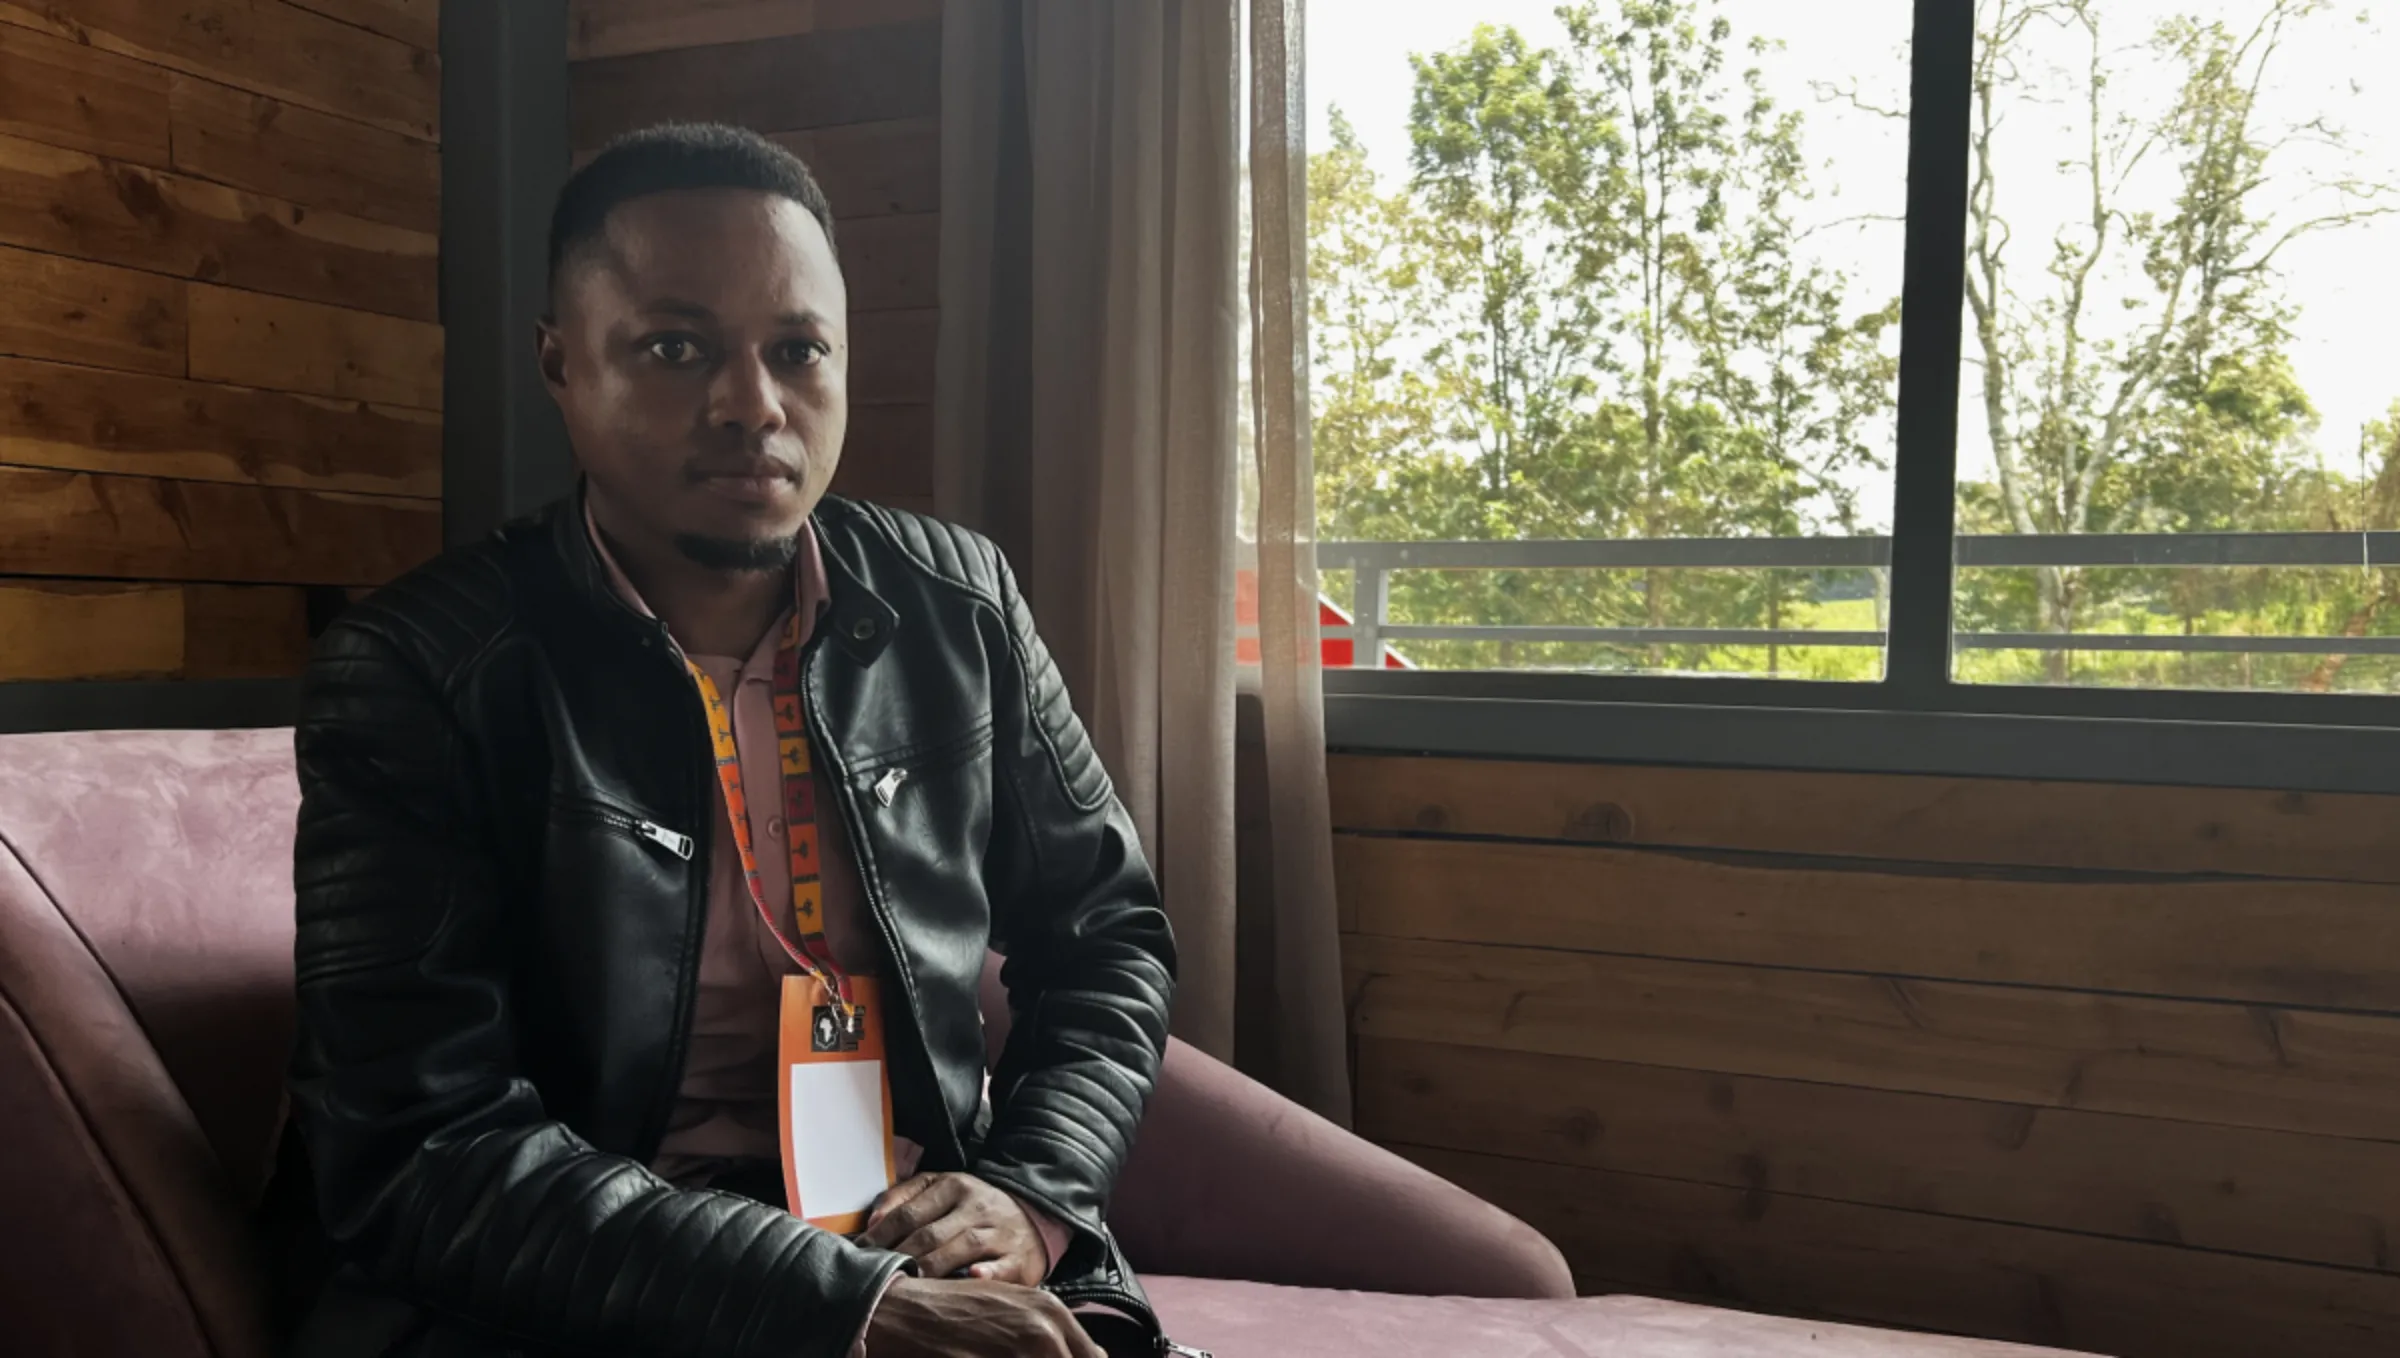 Facebook whistleblower Daniel Motaung and founder of the African Content Moderators Union during an interview on the sidelines of the Mozilla Festival in Nairobi, Kenya on Sept. 22, 2023. Thomson Reuters Foundation/Nita Bhalla